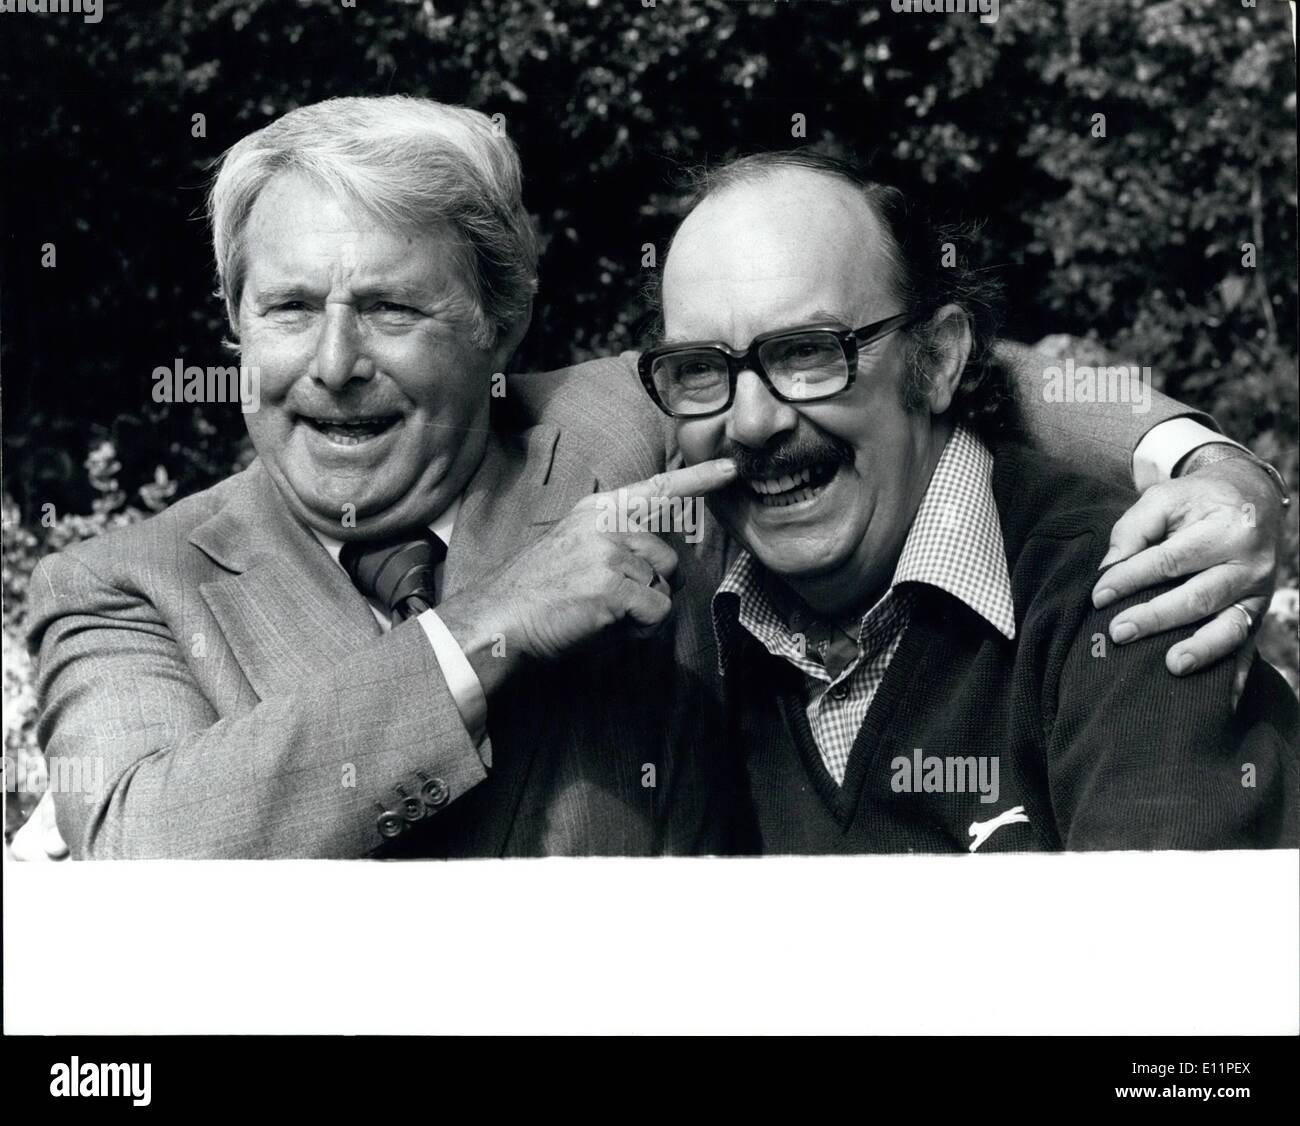 Aug. 08, 1979 - ERIC AND ERNIE PLAN TELEVISOIN COMEBACK. ERIC MORECAMBE and ERNIE WISE renewed their comedy act yesterday and laughed off rumours that Eric's heart operation would stop them returning to television, at the home of Eric near Harpenden, Harts yesterday. photo shows: Morecambe and Wise show back in fine trim with a laugh at the expence of Eric Morecambe's moustache at the comedian's home at Harpenden, Herts, yesterday. Stock Photo